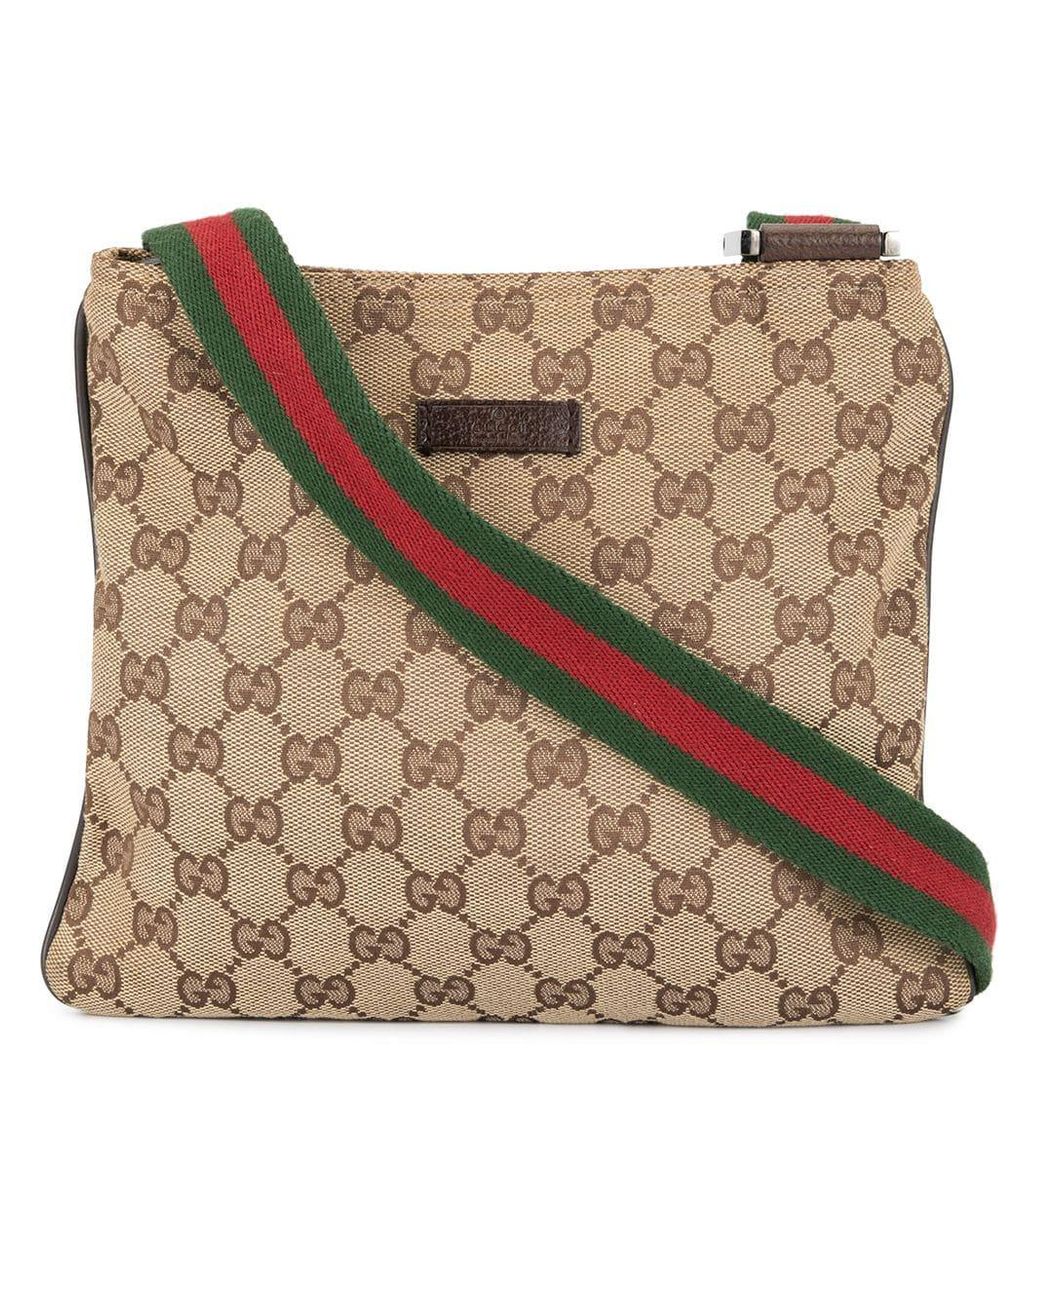 Gucci Pre-owned Women's Leather Cross Body Bag